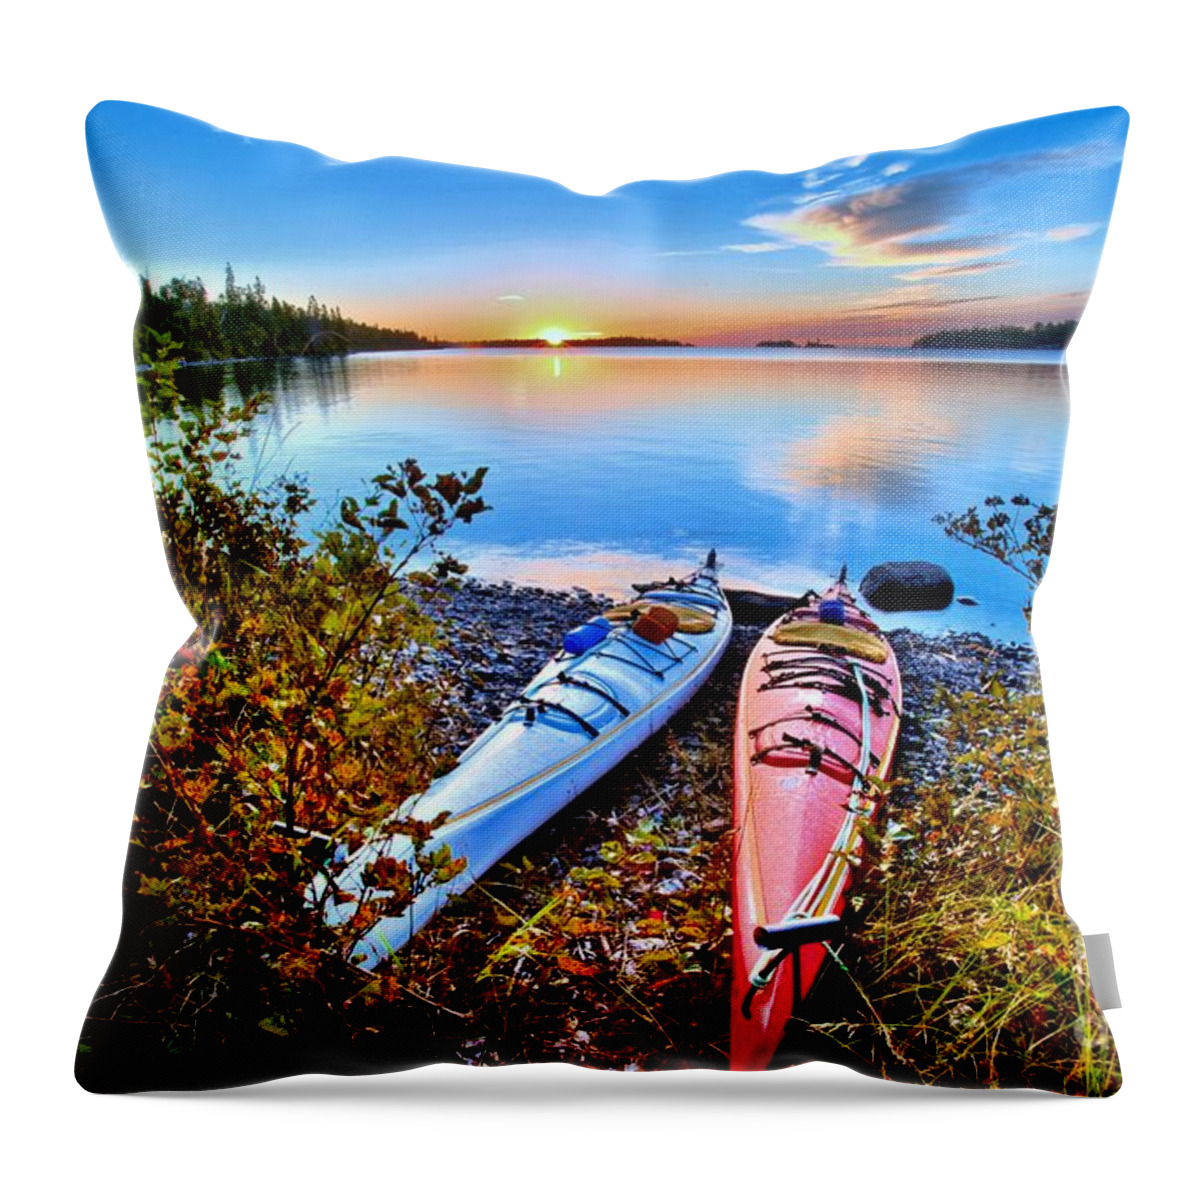 Isle Royale National Park Throw Pillow featuring the photograph Perfectly Calm by Adam Jewell